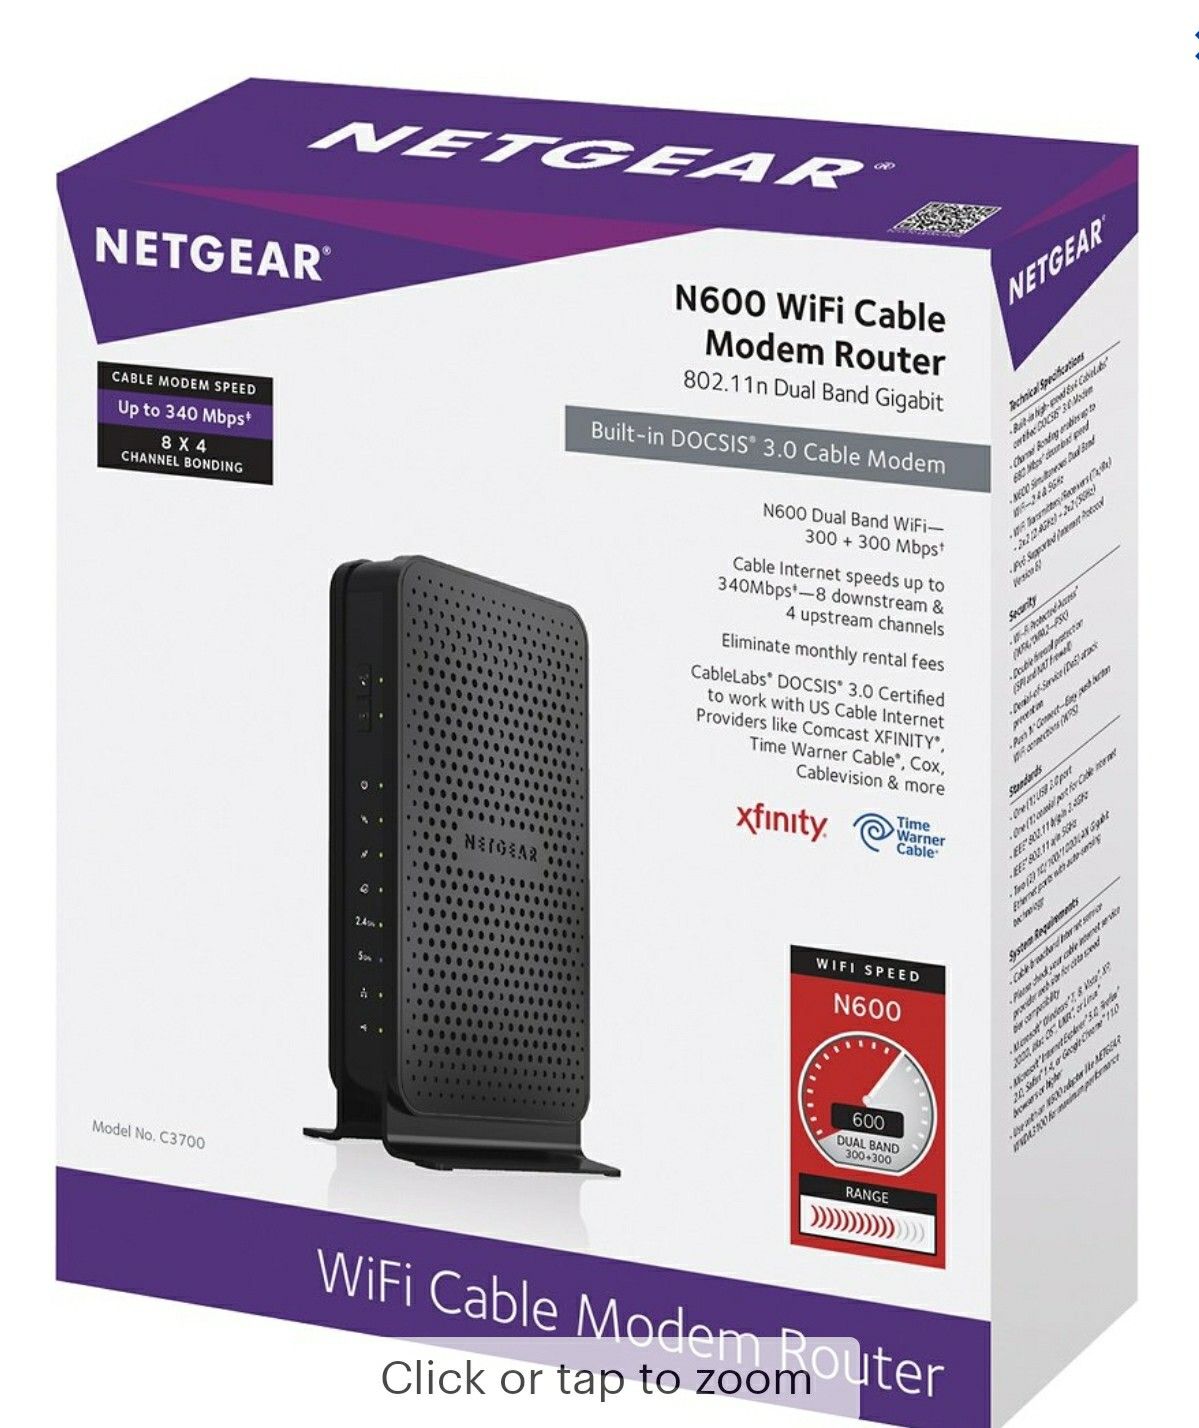 NETGEAR - Dual-Band N600 Router with 8 x 4 DOCSIS 3.0 Cable Modem - Black